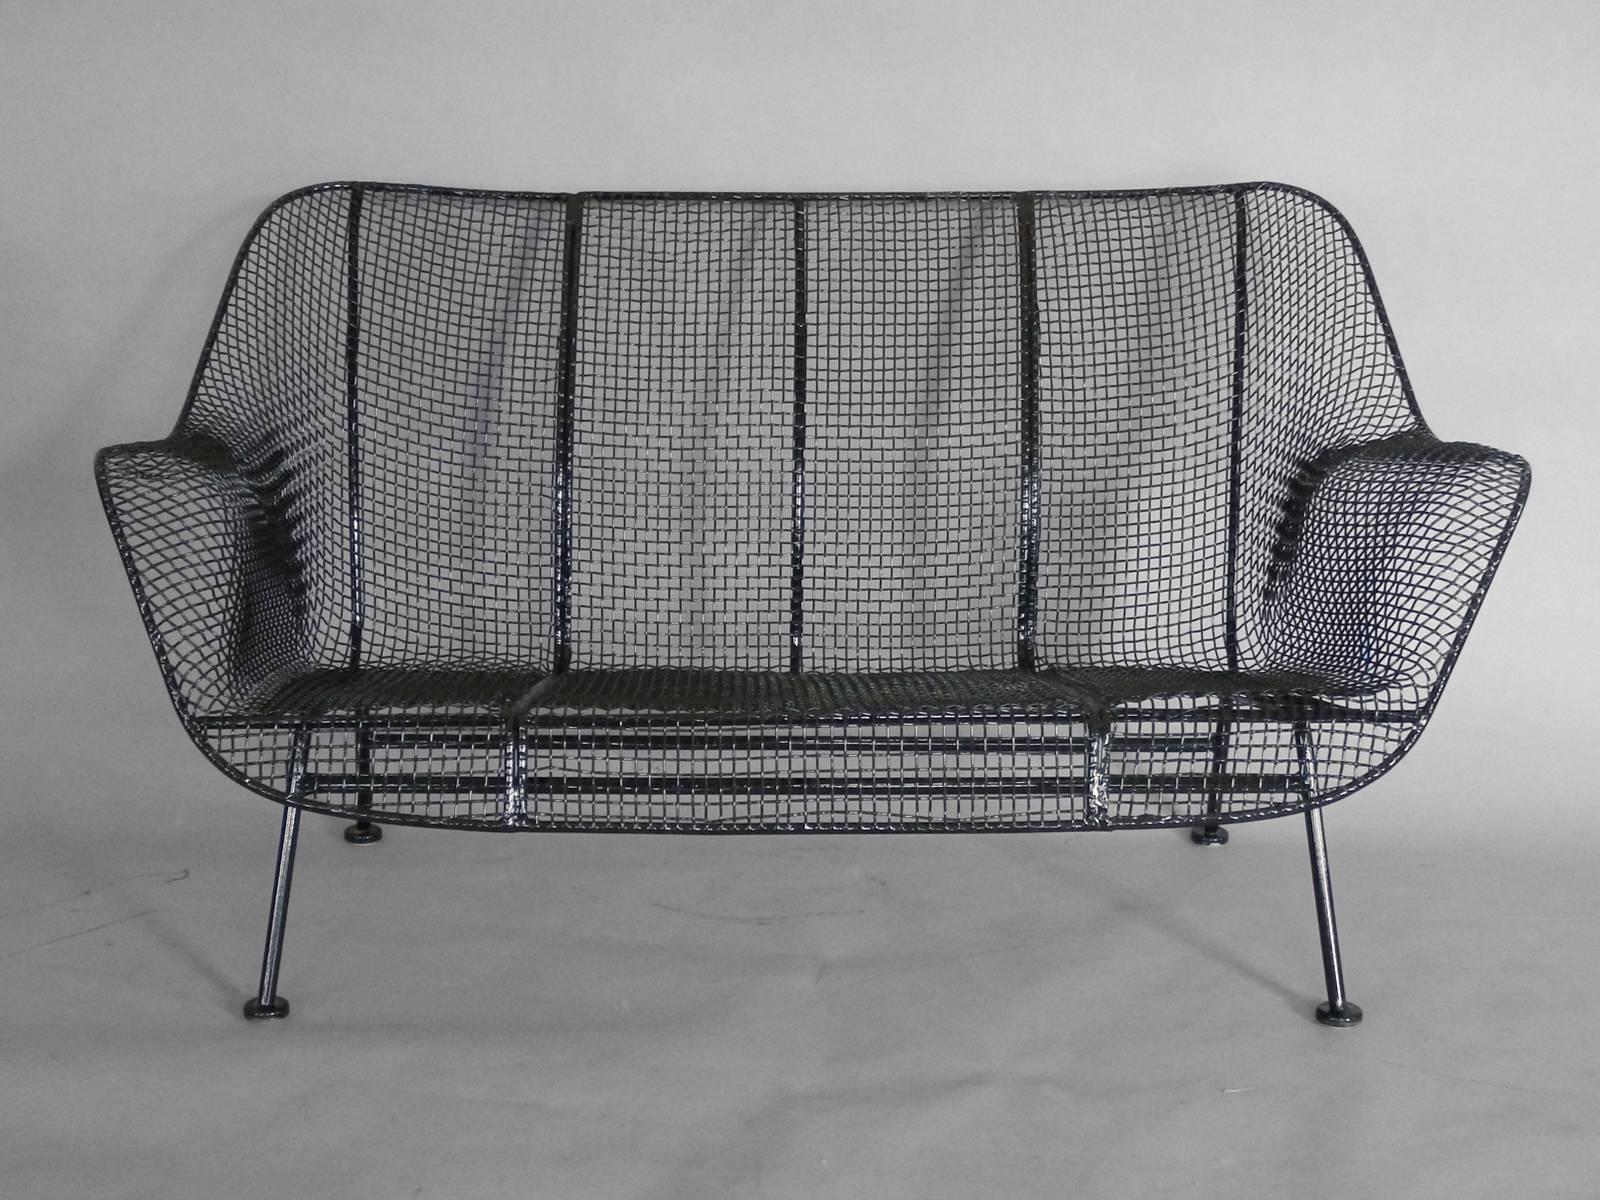 Russell Woodard Sculptura series pair of wrought iron settees with steel mesh seats. Properly restored finished in gloss black powder coat. New foot glides added. Cool and comfortable.